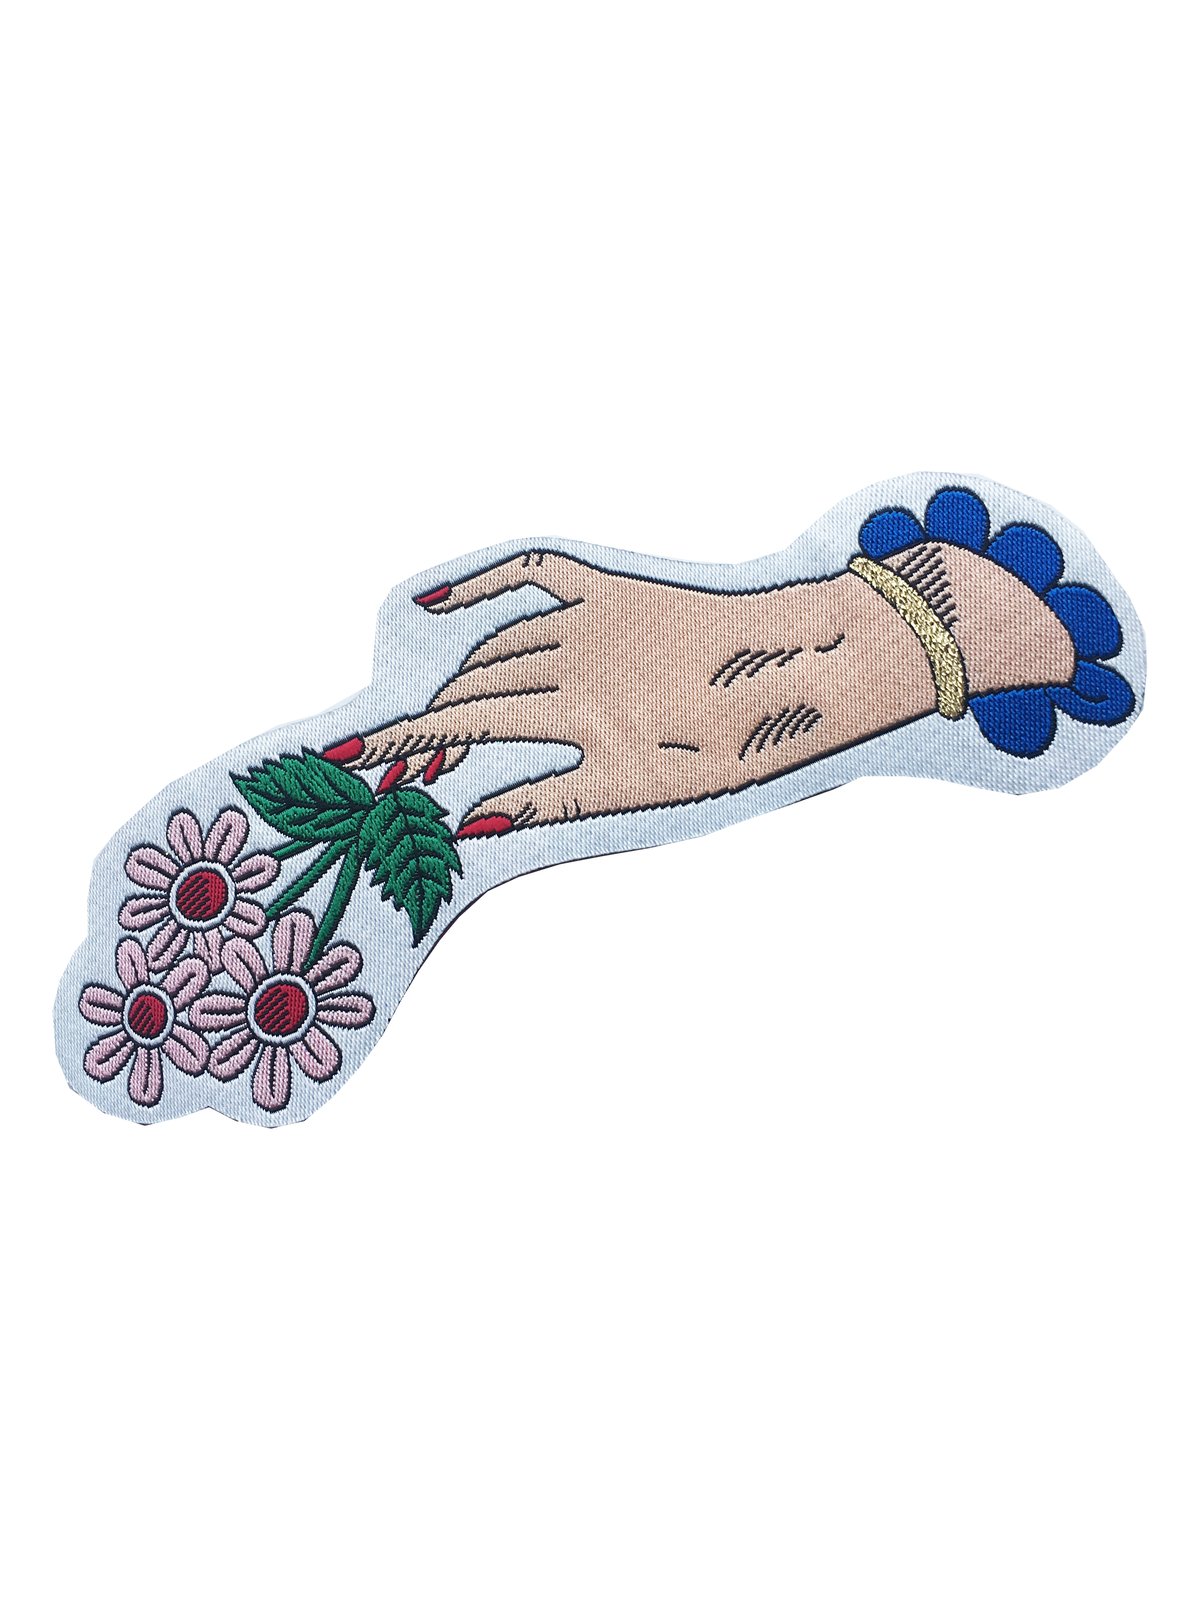 Hand and Flowers Patch